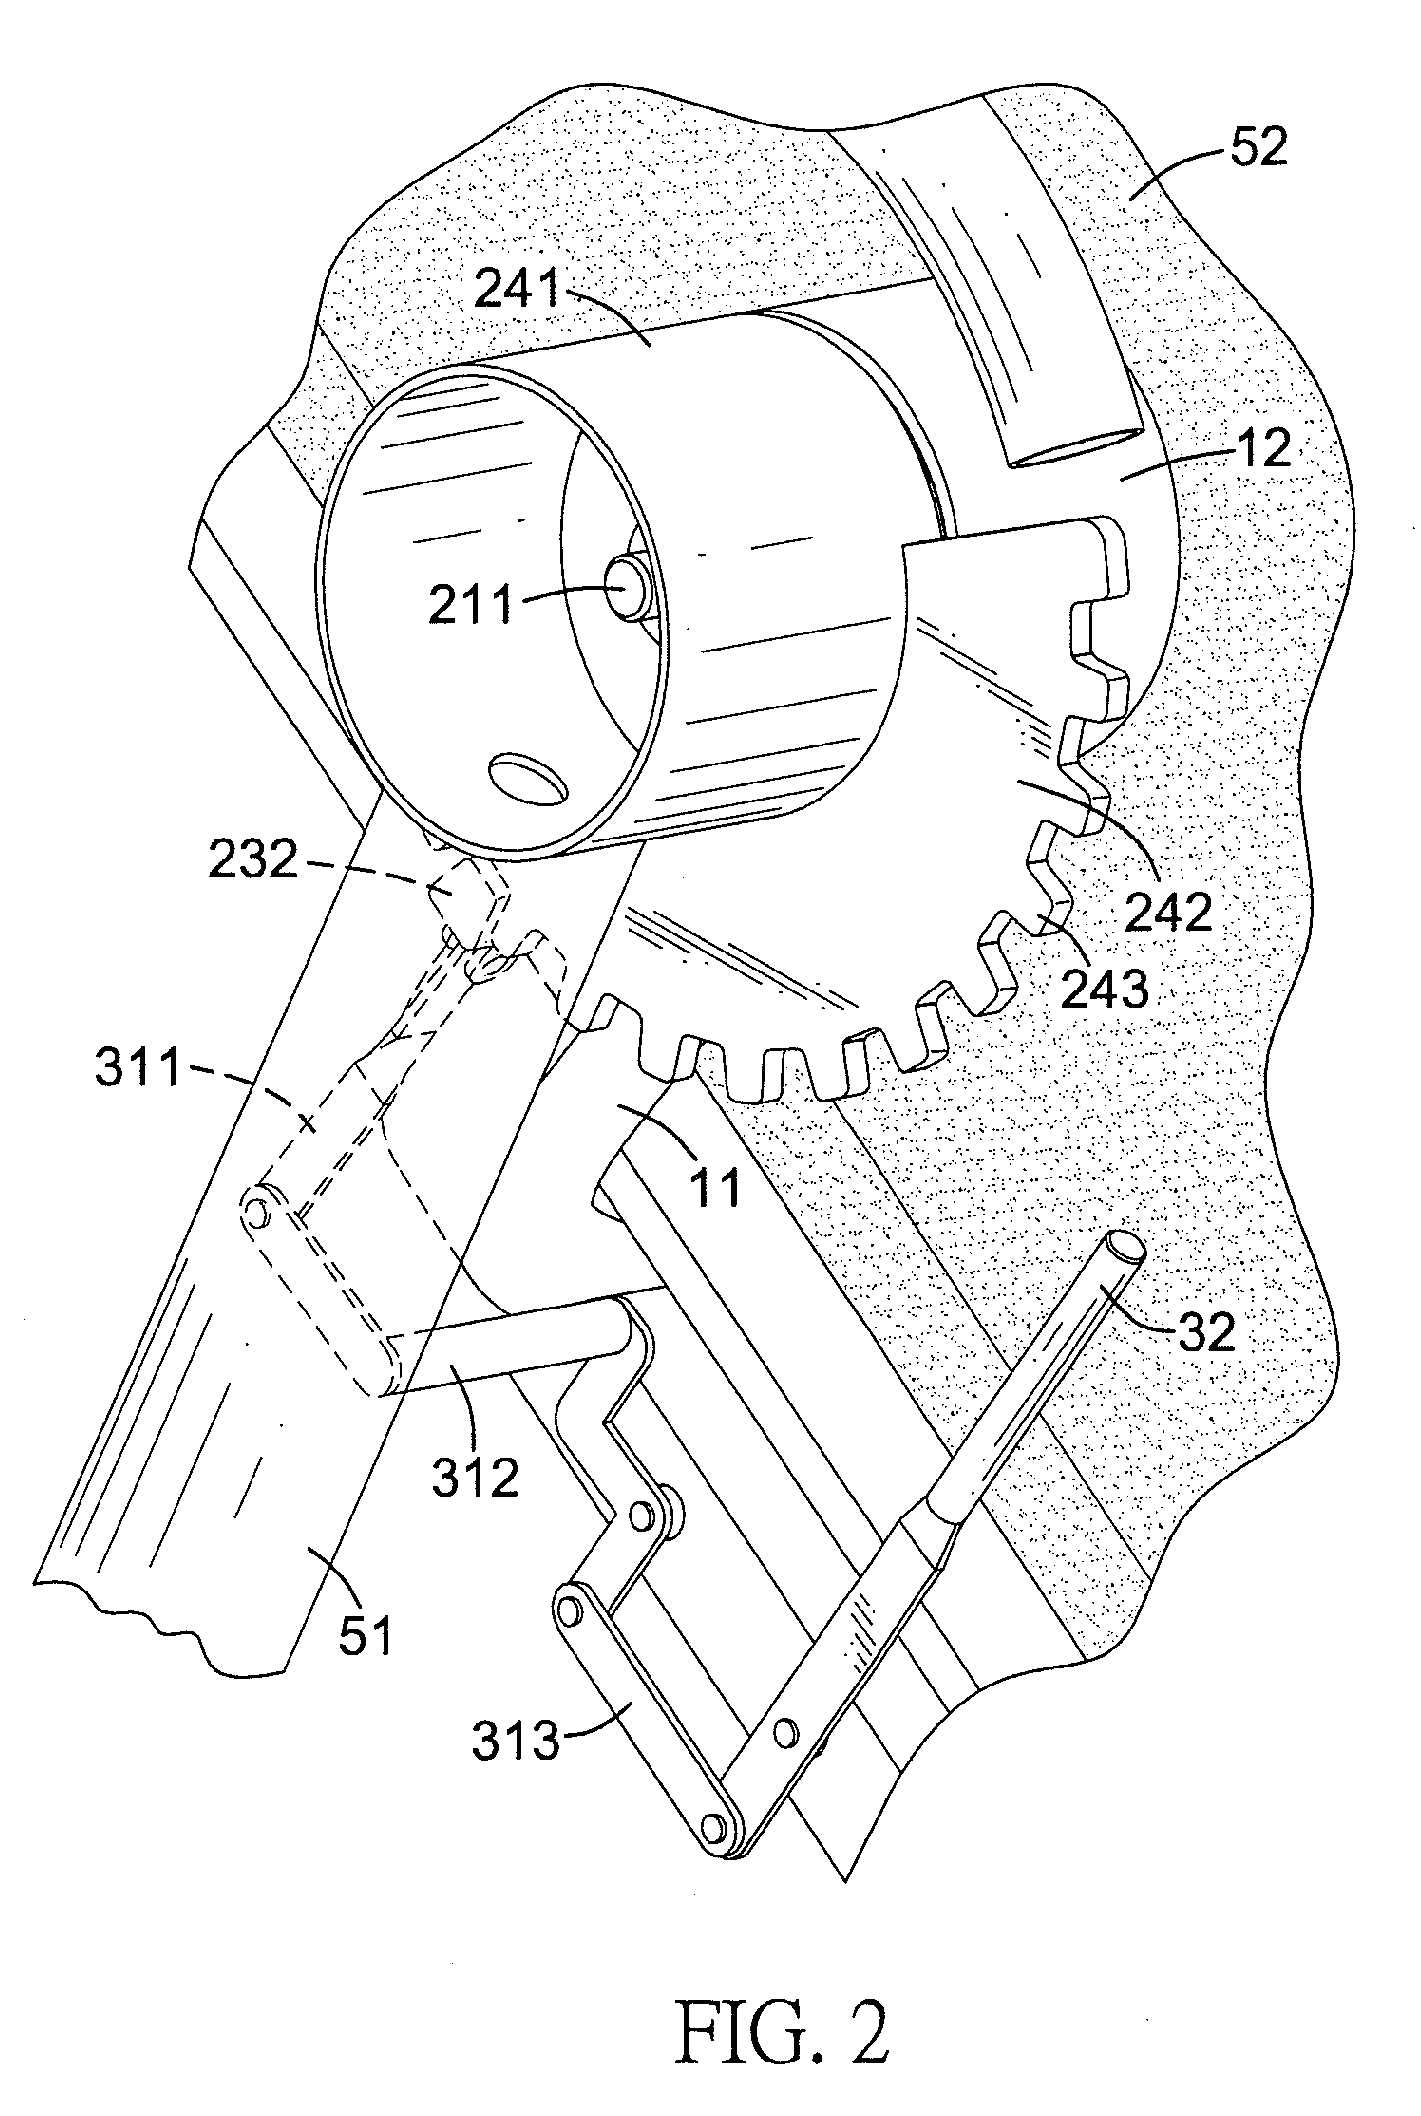 Multi-stage orientating assembly for an inversion table